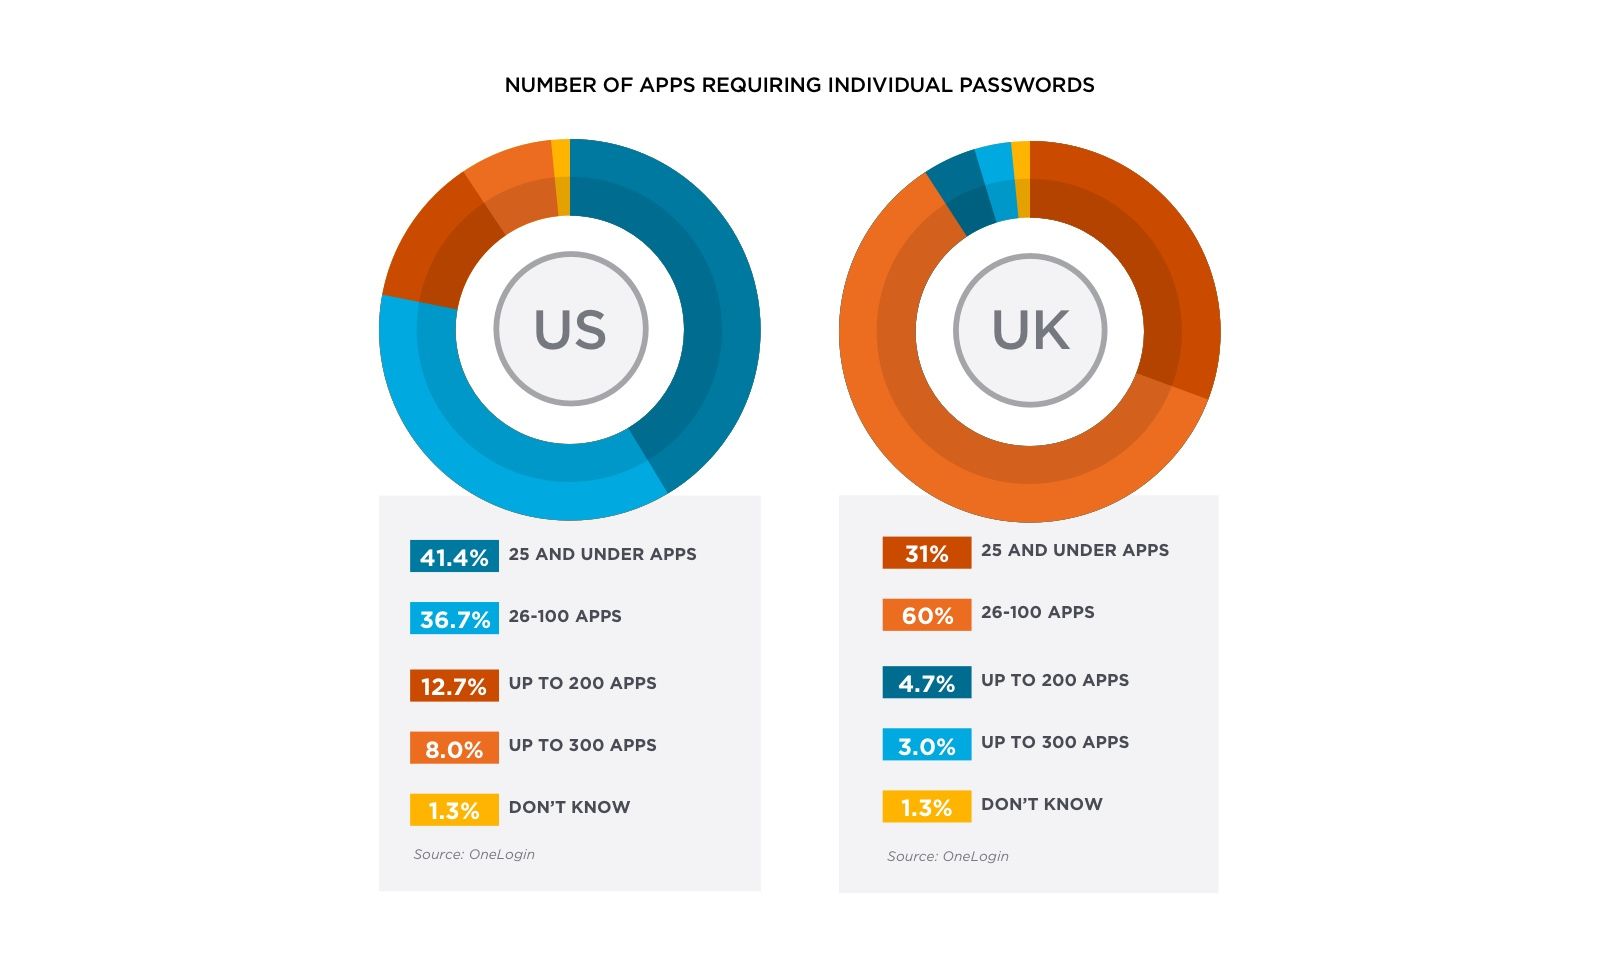 Number of US & UK business apps requiring individual passwords